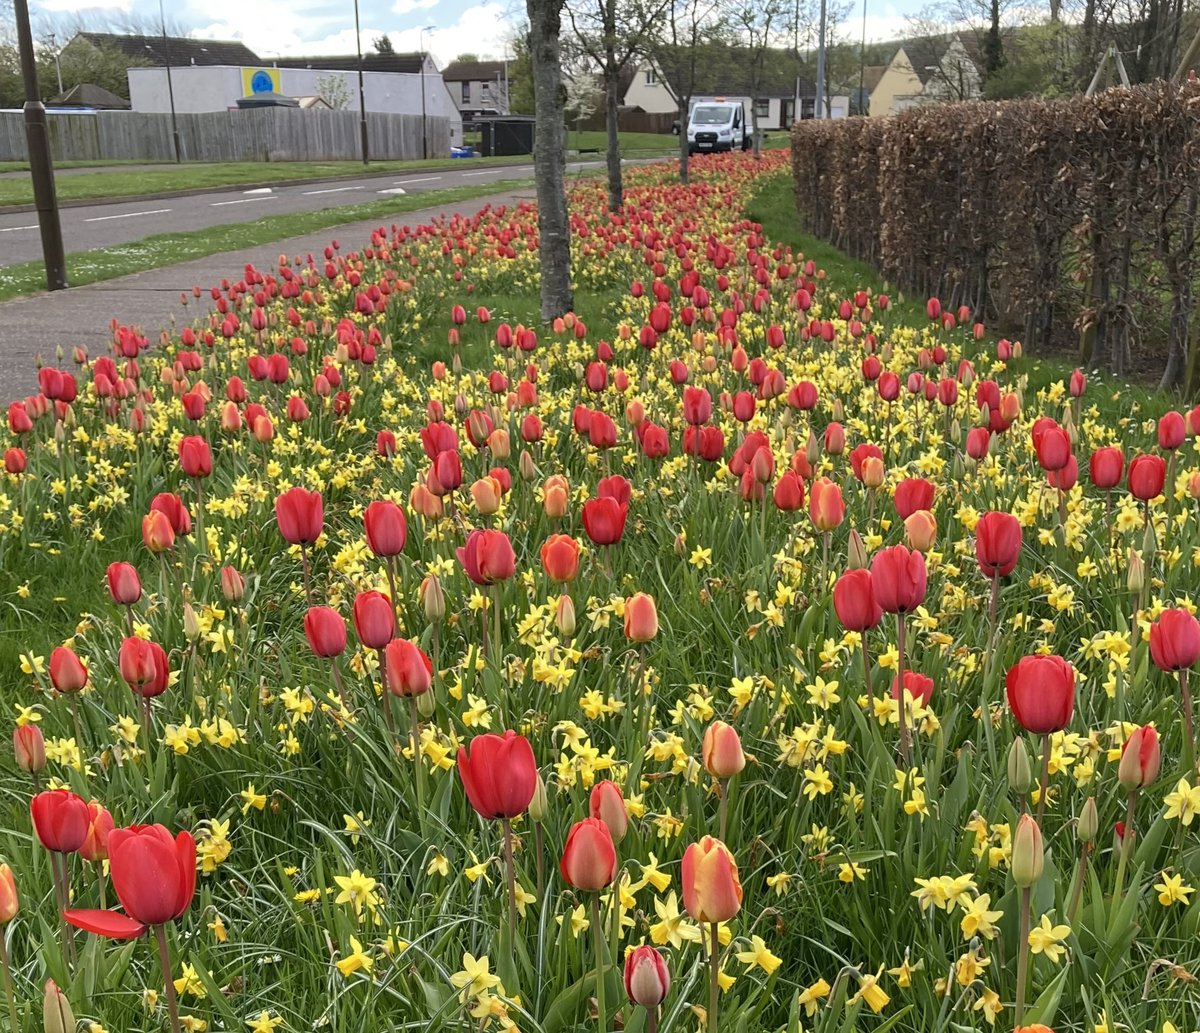 Beautiful displays of colour - the result of bulb planting in the Dunbar area through the Nature Networks initiative.